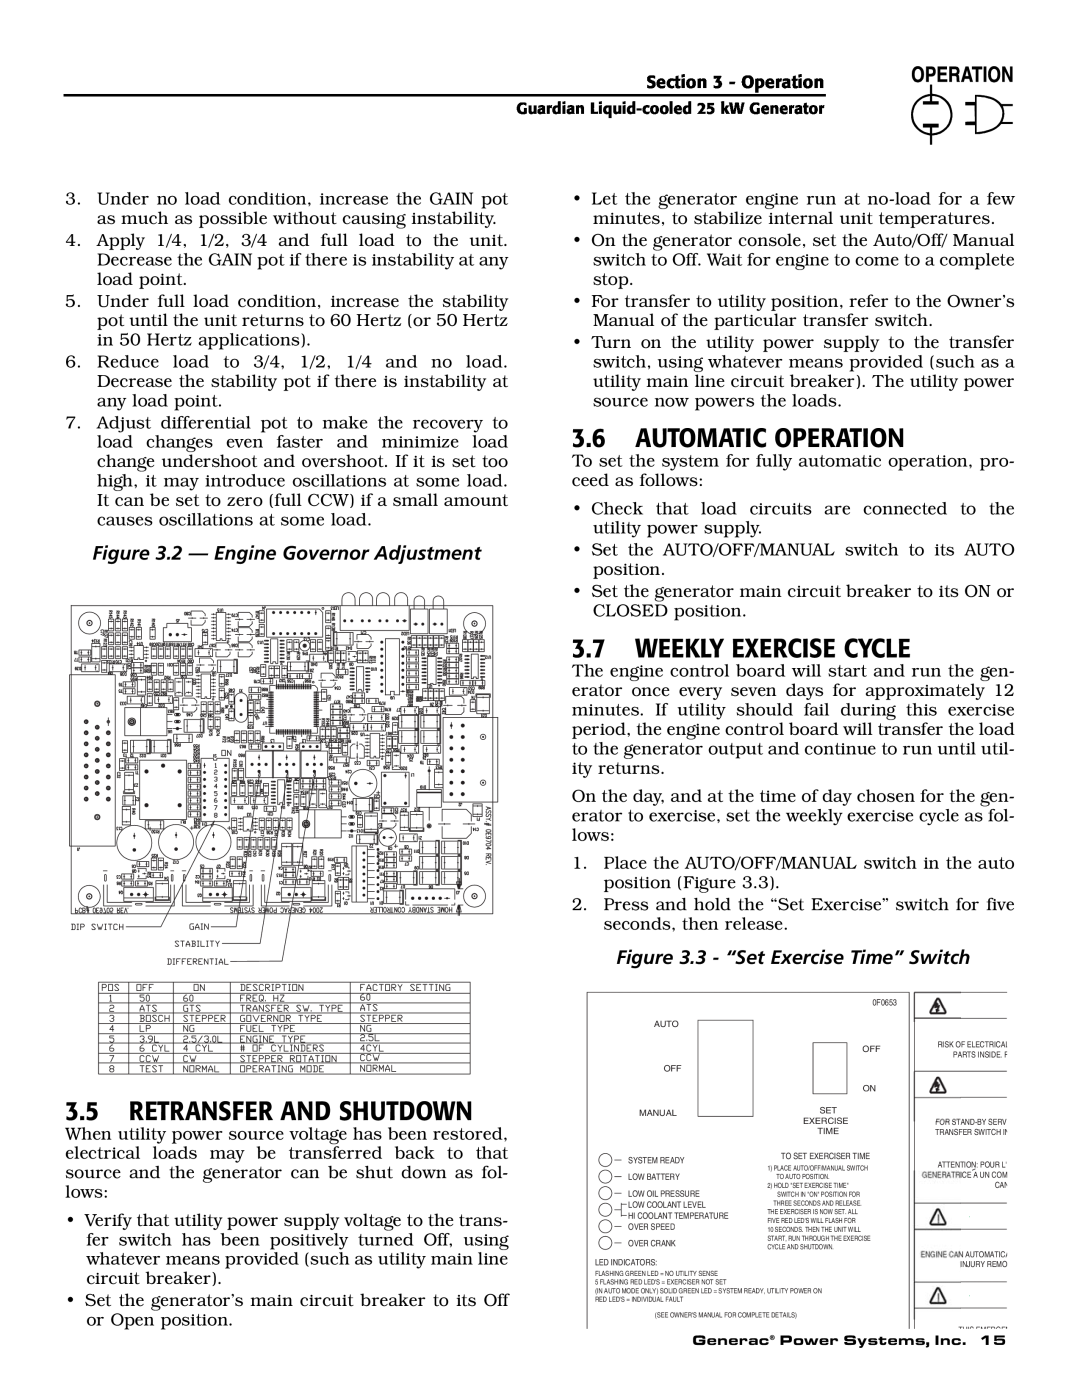 Generac Power Systems 005040-0, 005040-1, 005053-0, 005053-1, 005054-0, 005054-1 owner manual 3.6AUTOMATIC OPERATION 